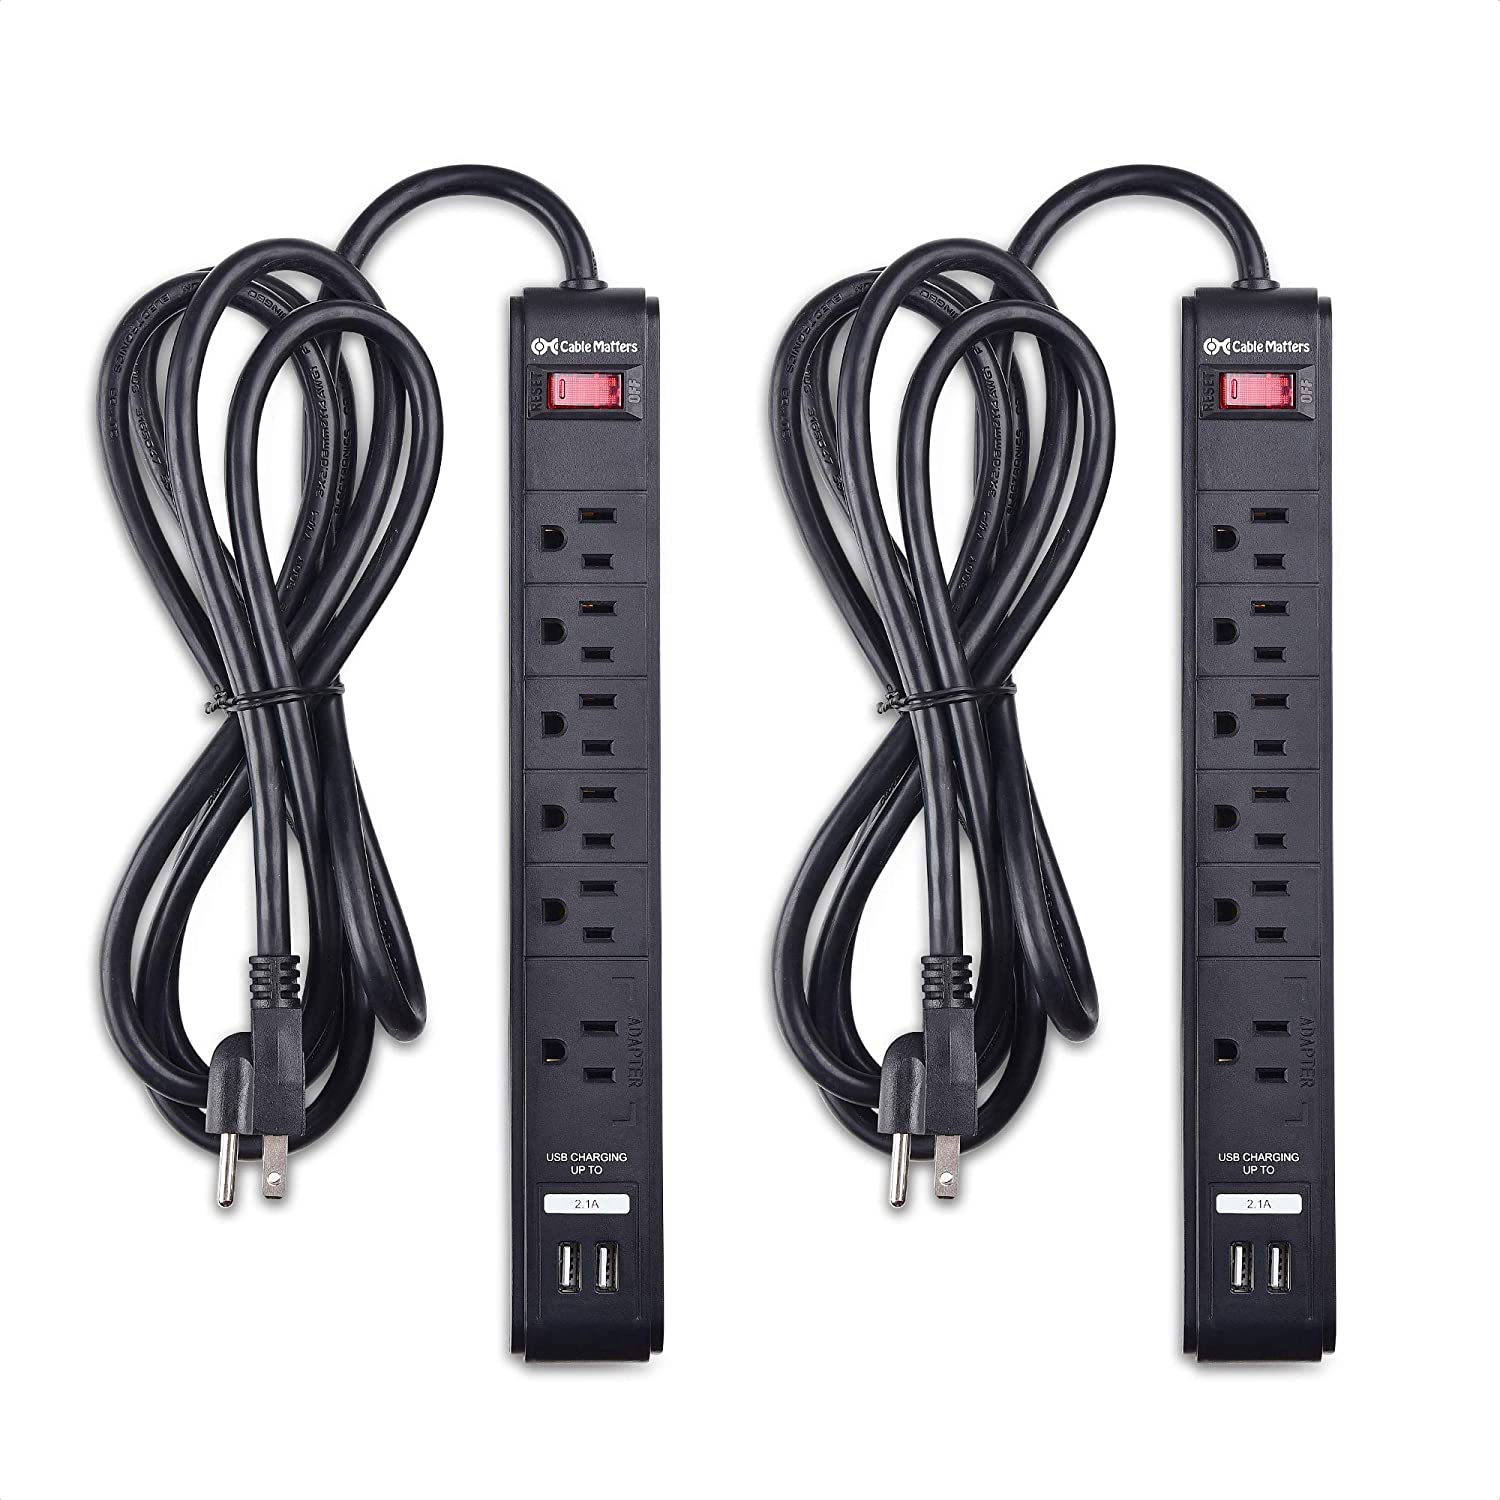 2 Pack Cable Matters 6 Outlet Surge Protector Power Strip with USB Charging Ports / 300 Joules